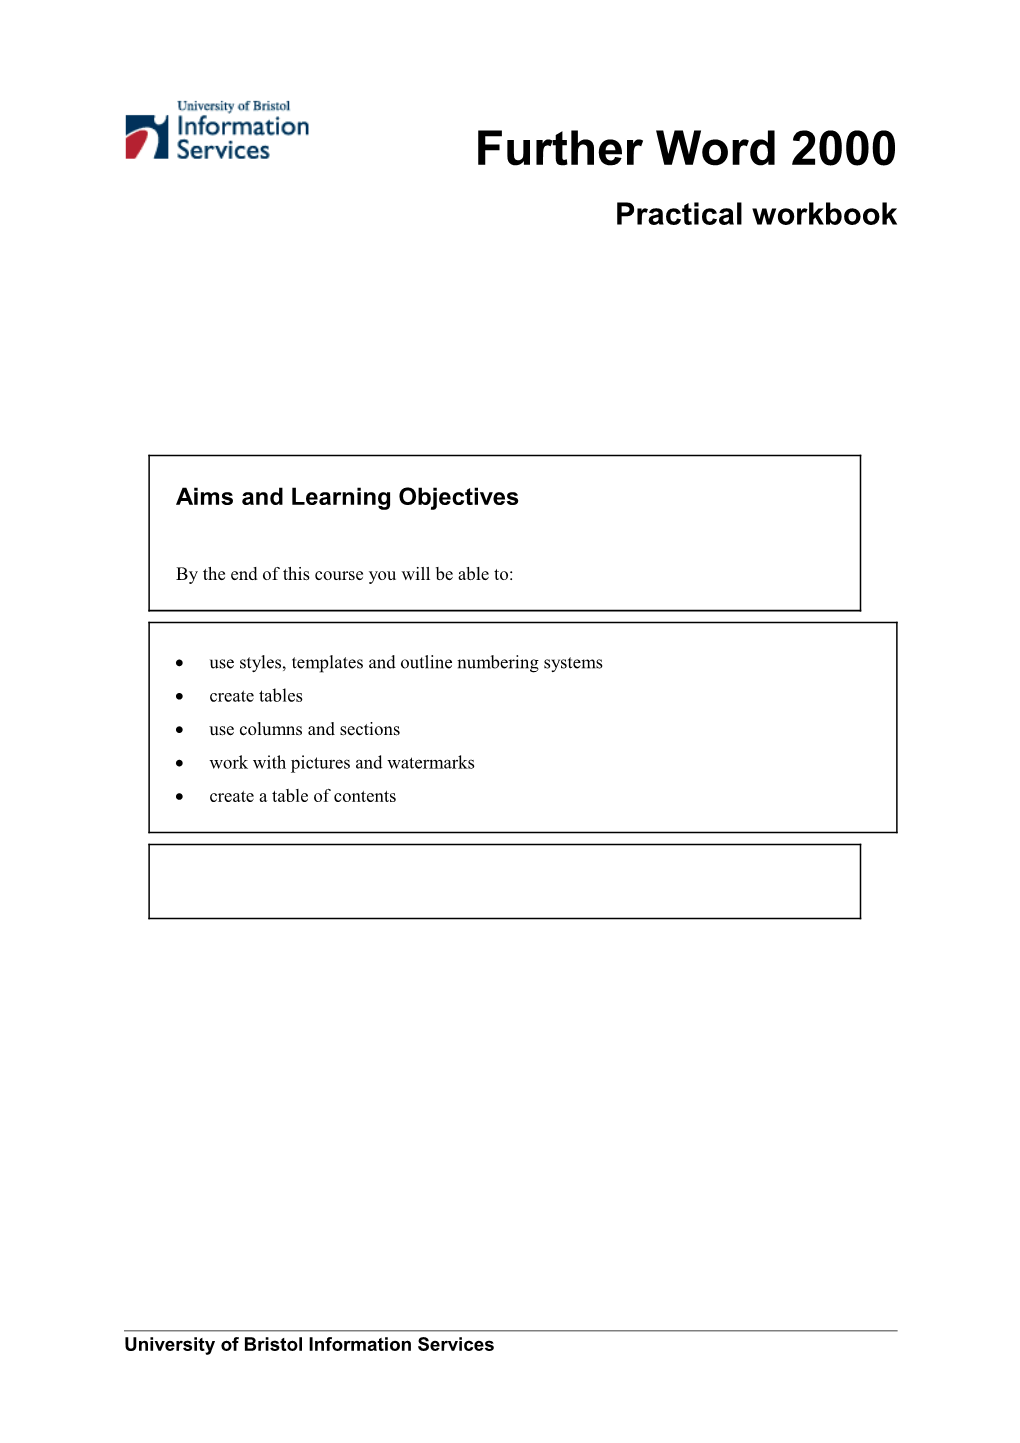 Aims and Learning Objectives